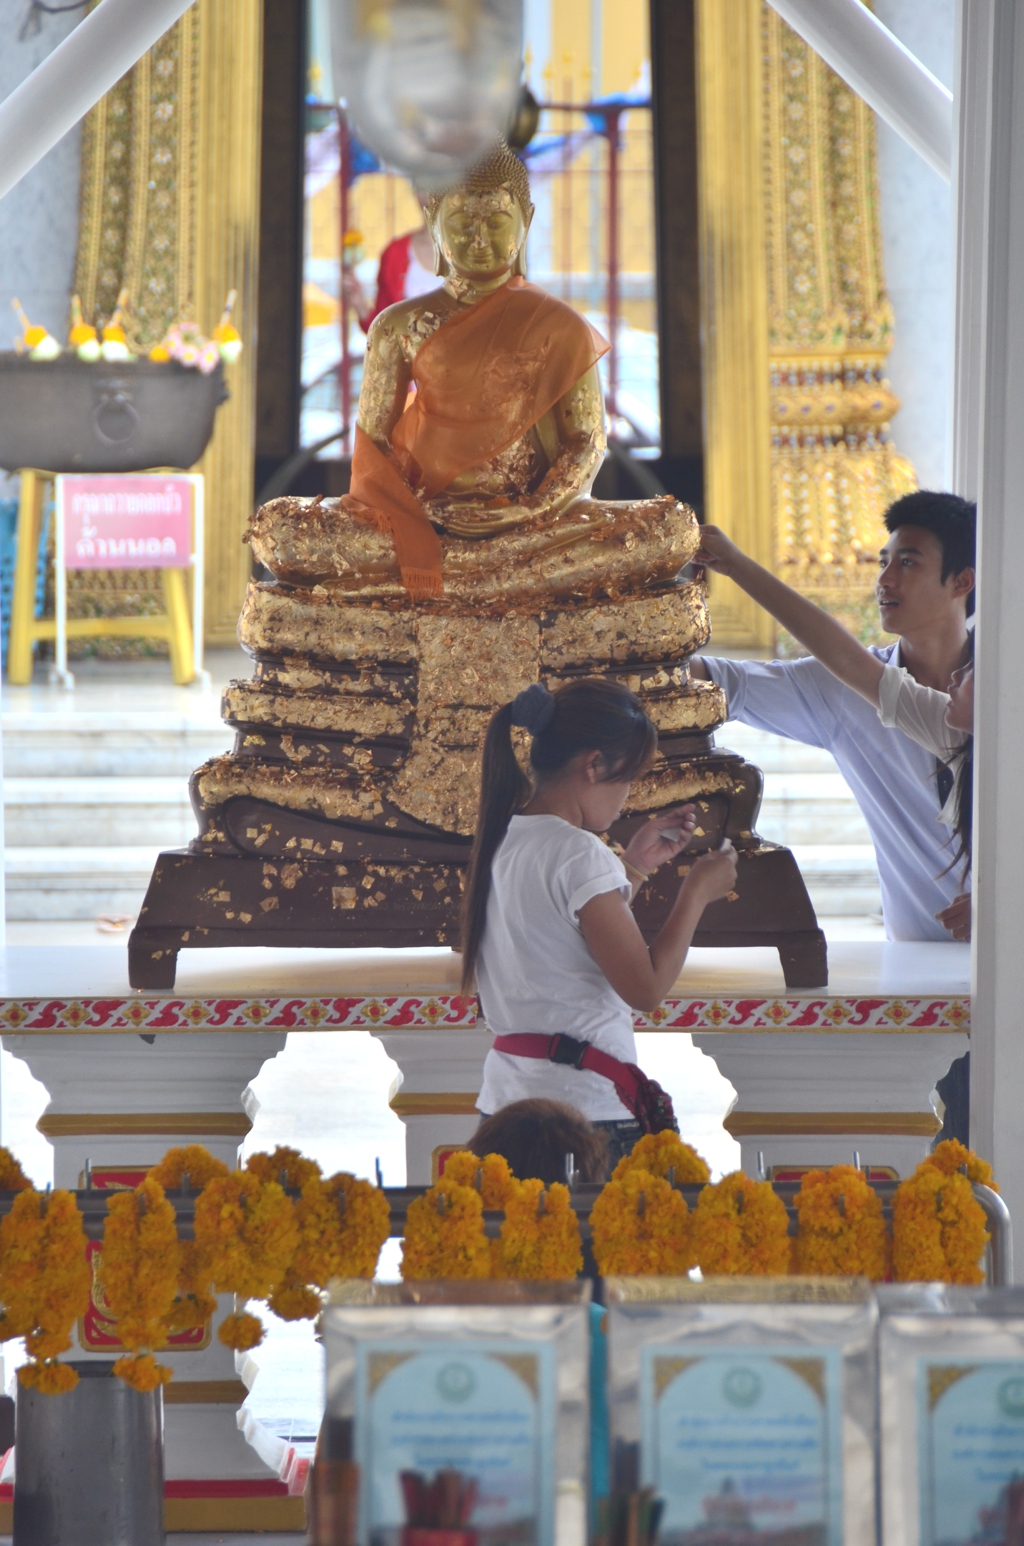 As is the case with many Buddhas in Southeast, the one at Wat Kalayanamitr is pretty with gold leaf by the faithful